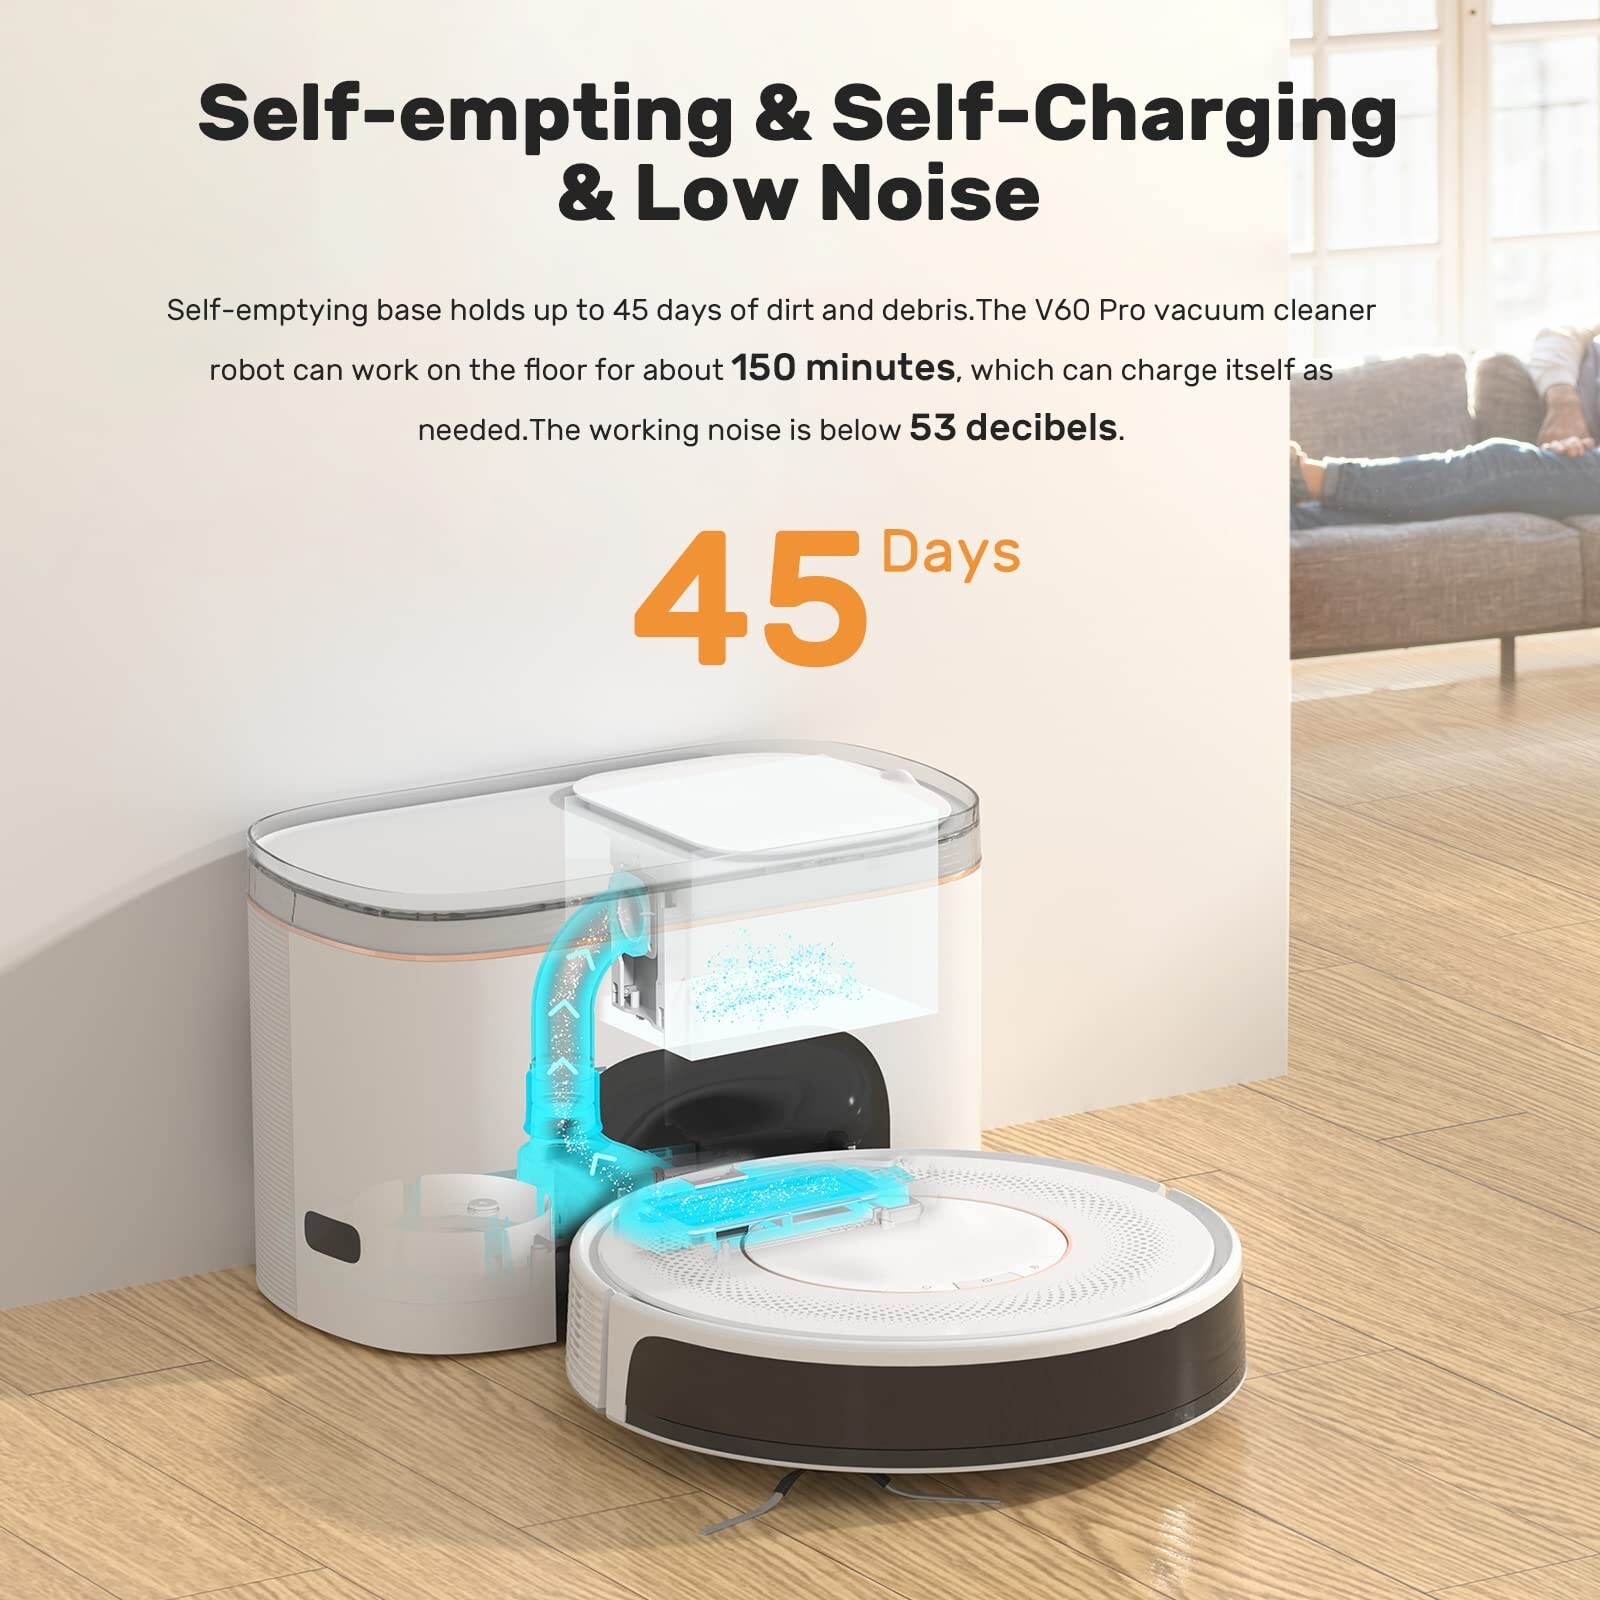 https://ak1.ostkcdn.com/images/products/is/images/direct/21644c06e4eaccc0980ffdcb182a8468bfc04774/Robot-Vacuum-Self-Empty-Base%2CCompatible-with-WiFi-App-Alexa-Google-Home.jpg